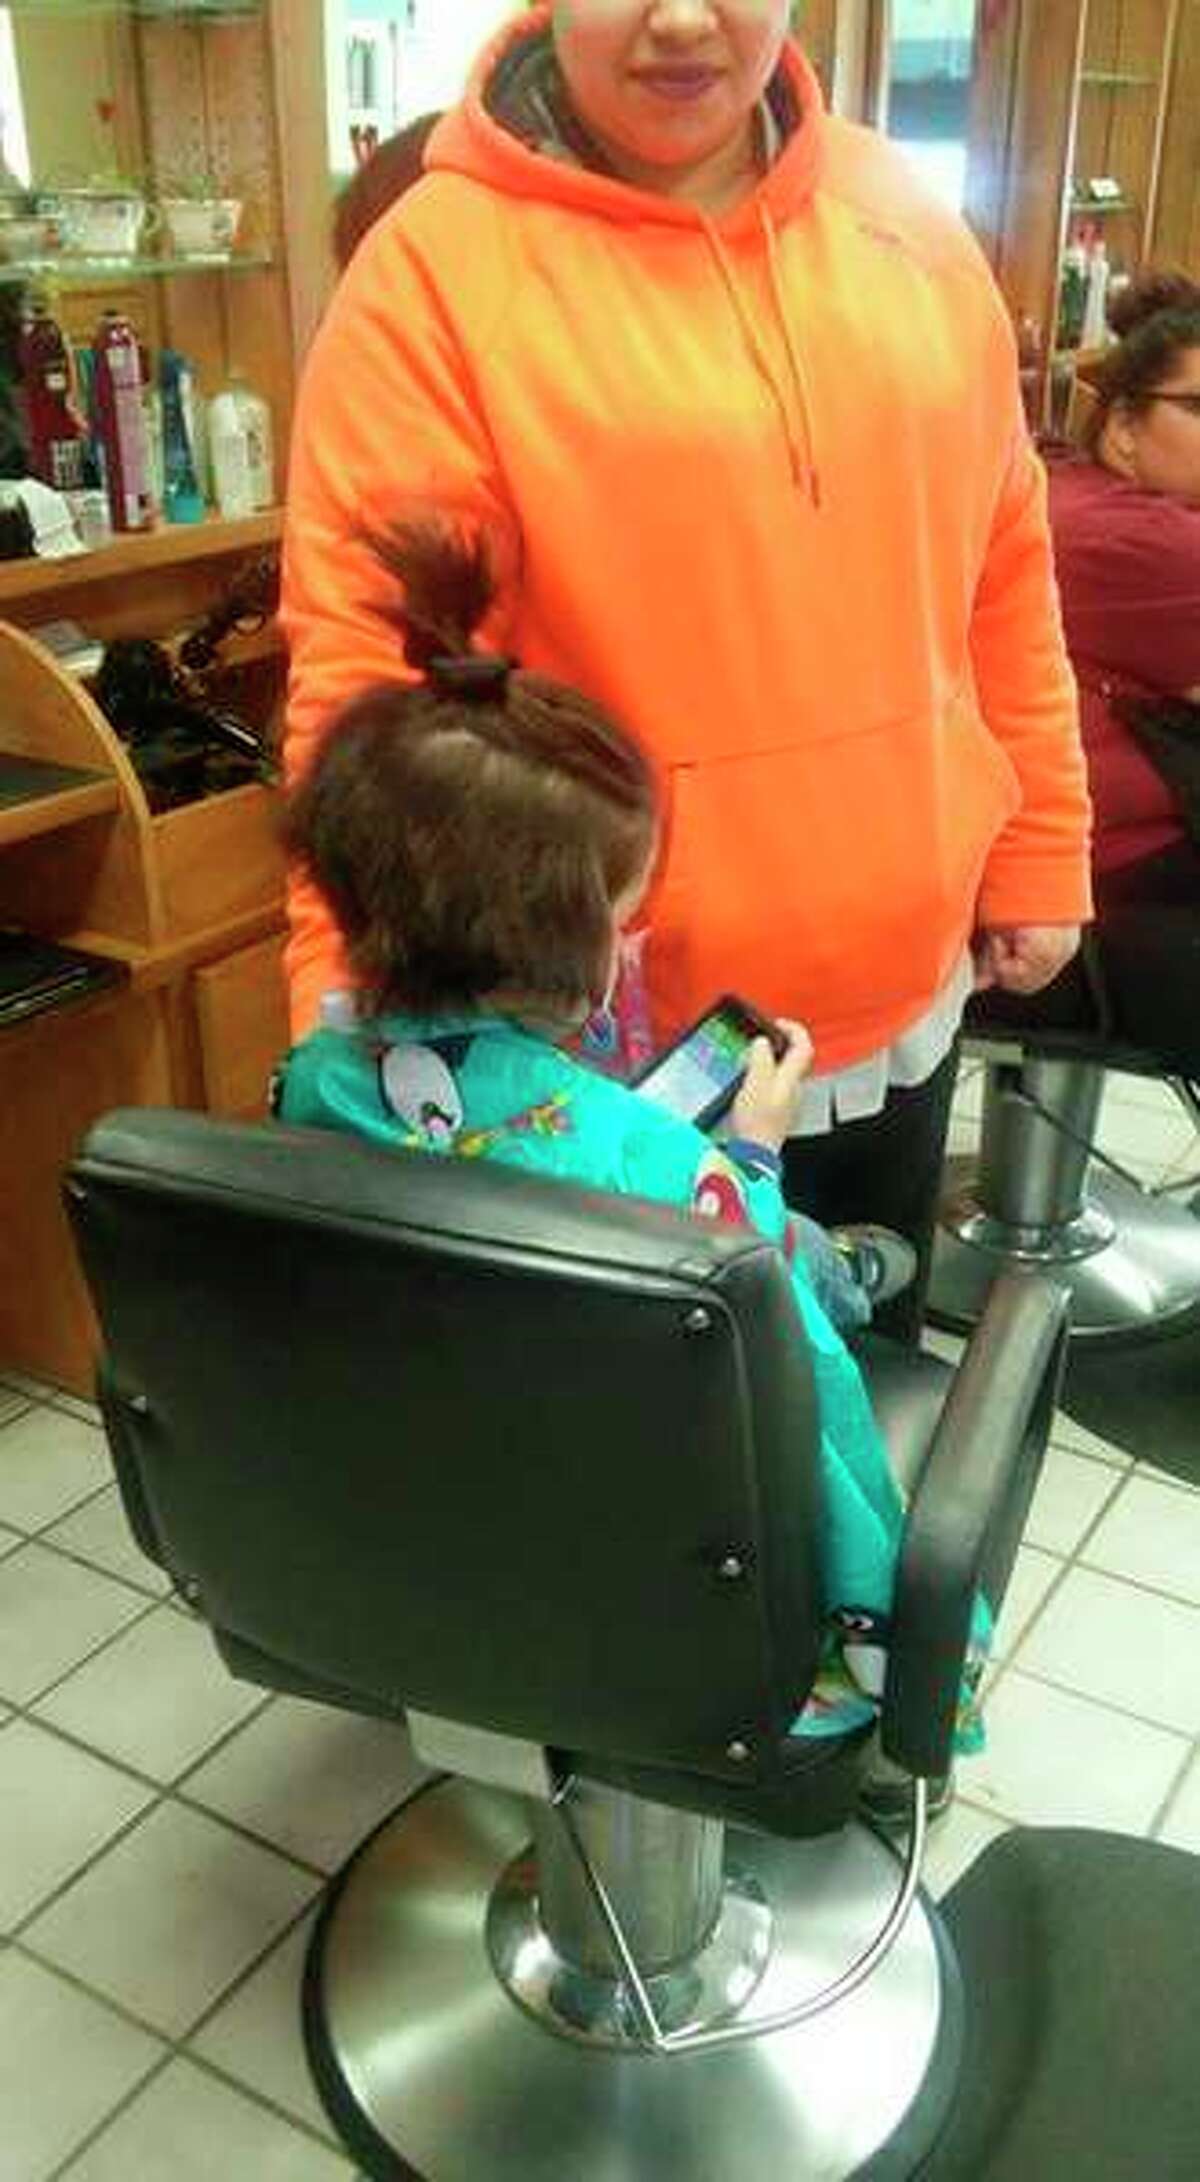 On Feb. 14, 3-year-old Odin Valentine, of Sanford, donated his hair to Wigs4kids.